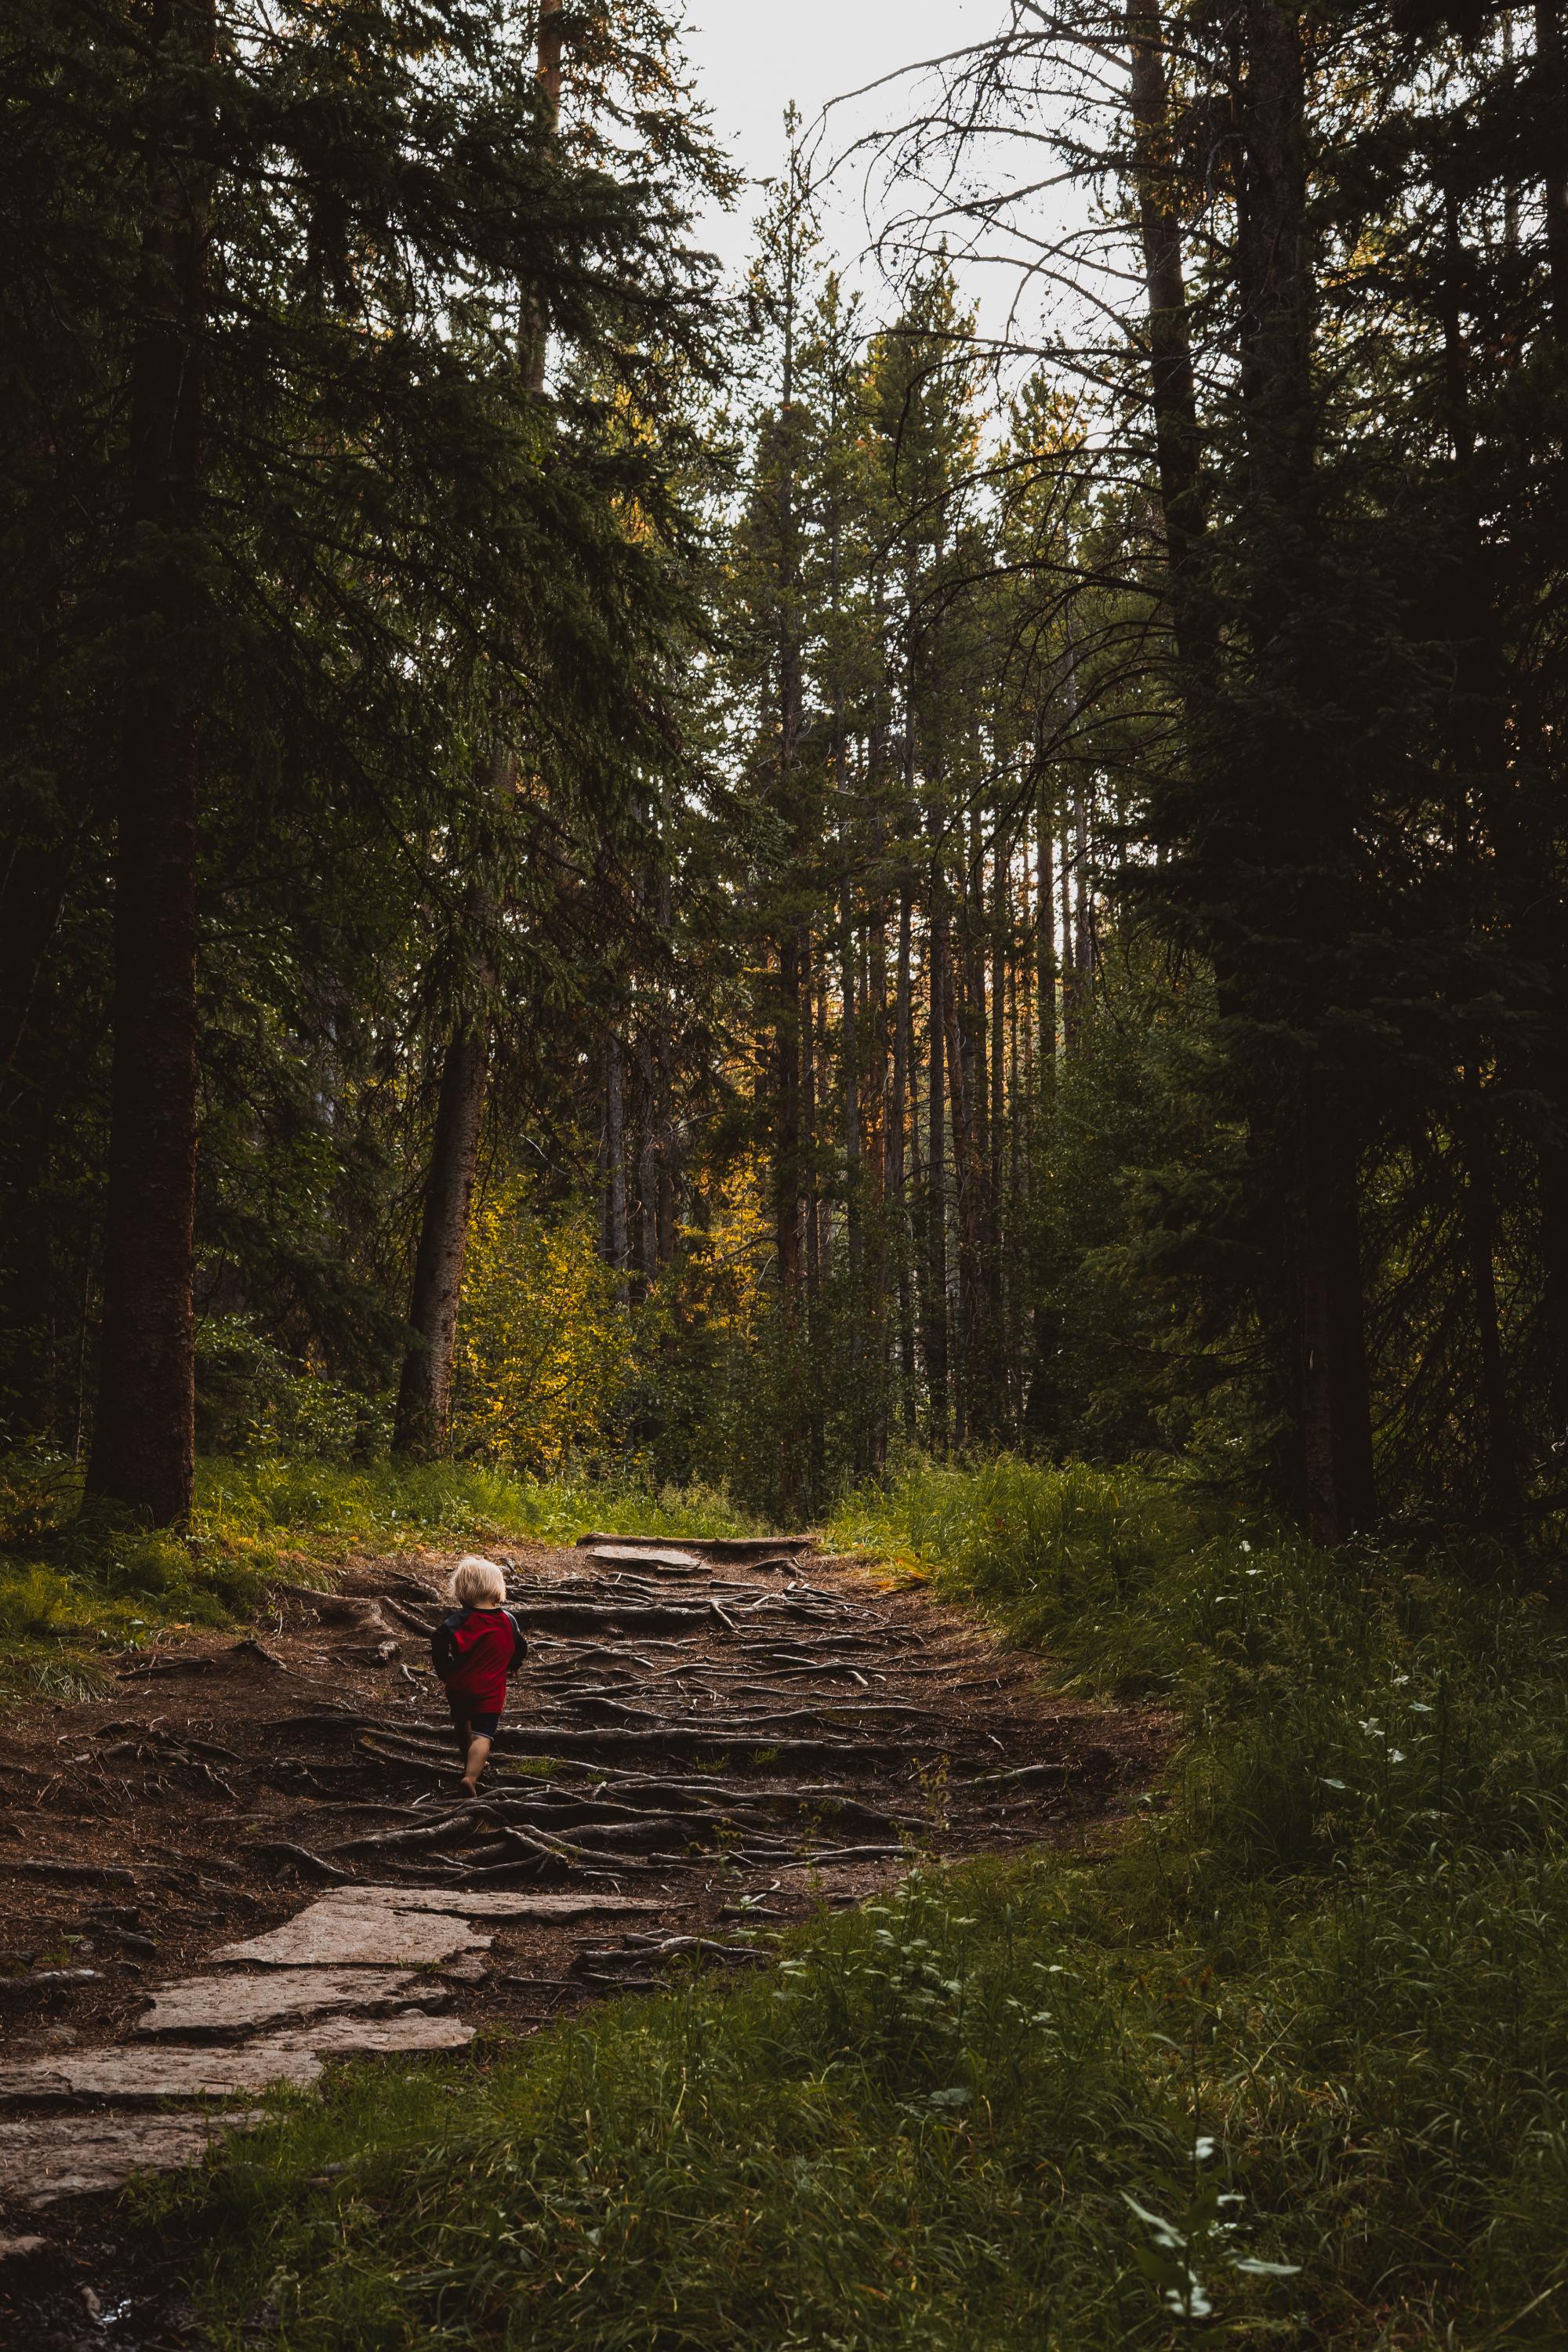 Photo of a child hiking while surrounded by towering trees